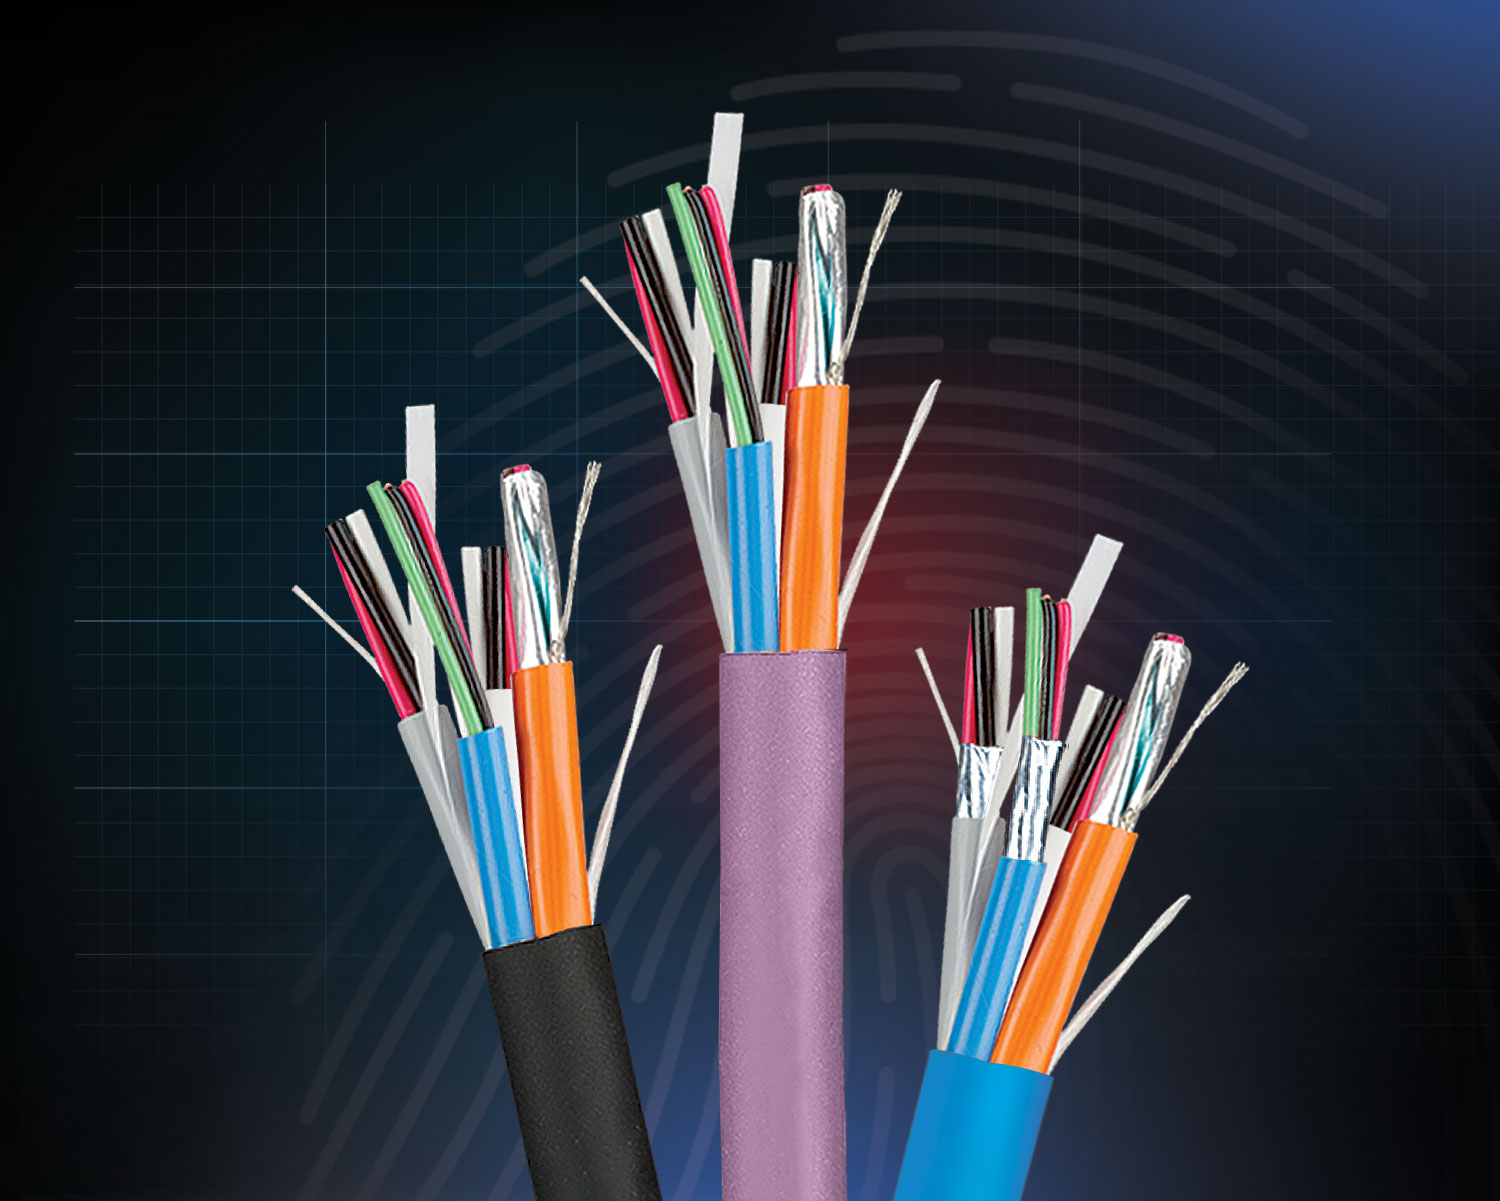 Access control cable, Card reader cables, Security cables, osdp reader, osdp vs. Wiegand, osdp cable, Wiegand, bundled cable, composite cable, outdoor cable, copper cable, alarm cable, shielded cable, plenum rated, security cable, control cables